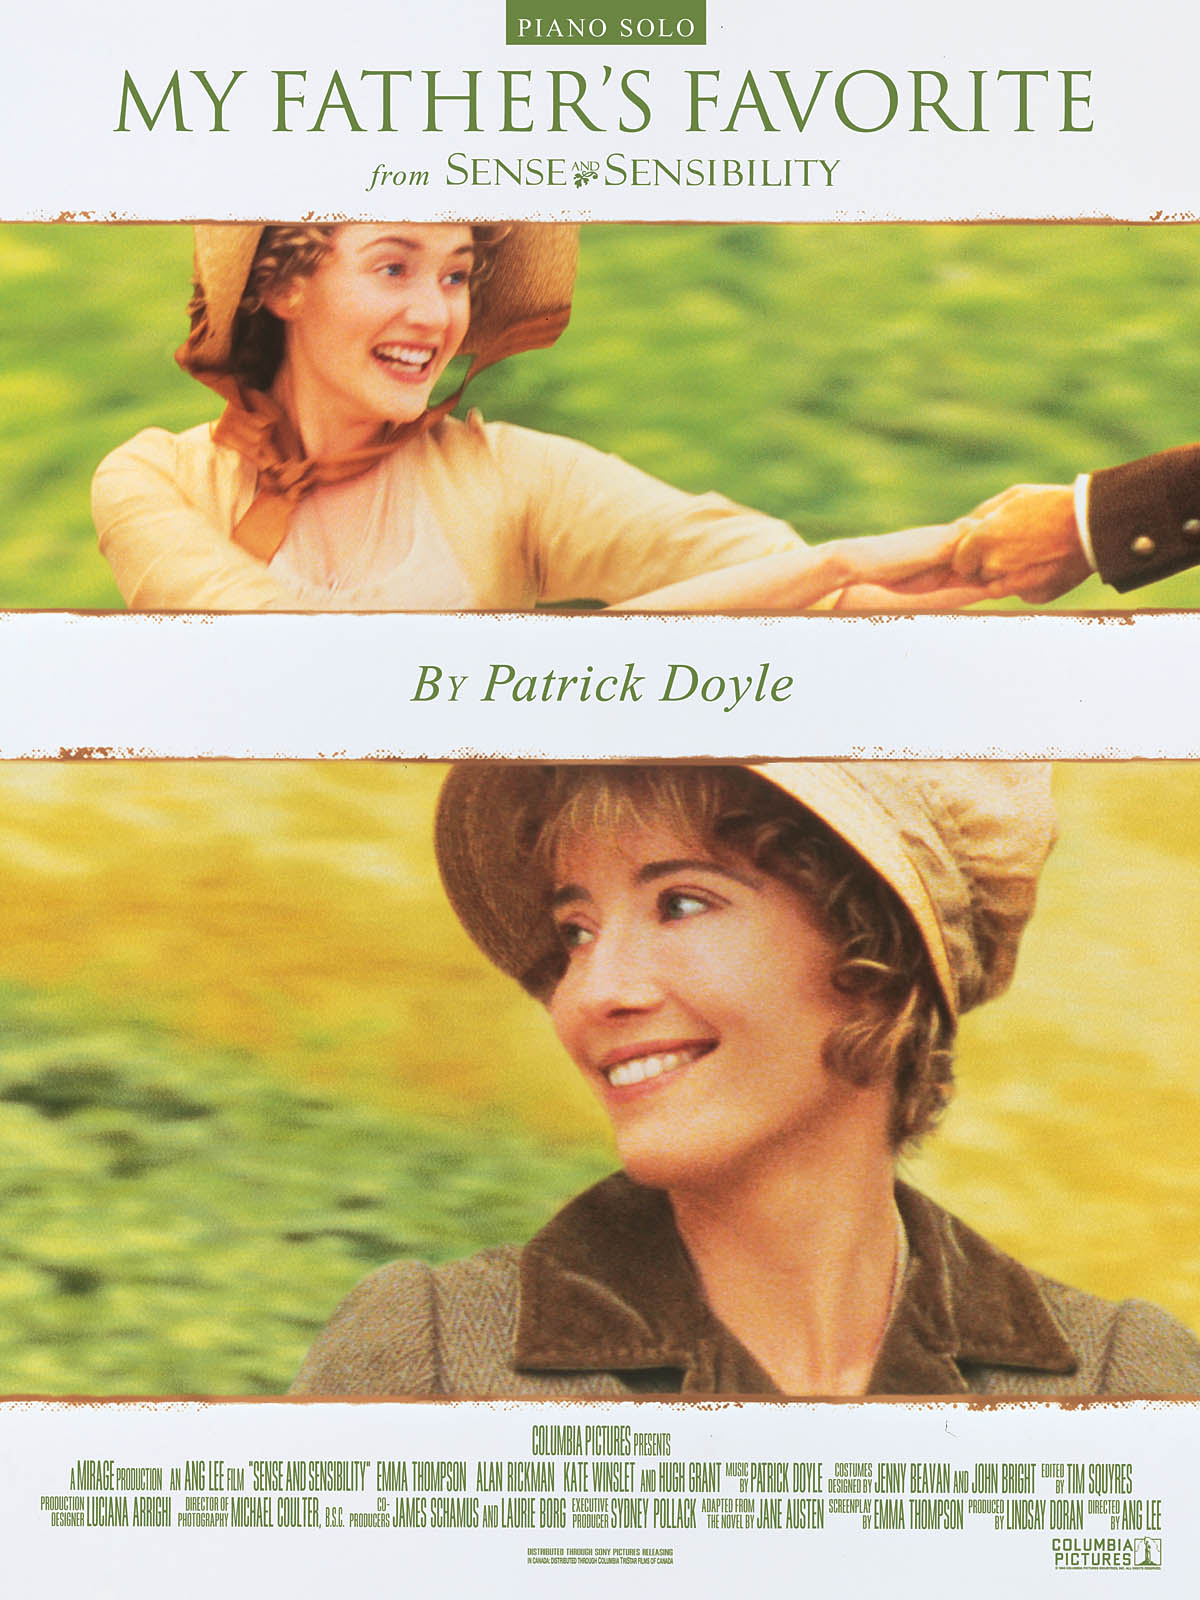 My Father’S Favorite From Sense & Sensibility